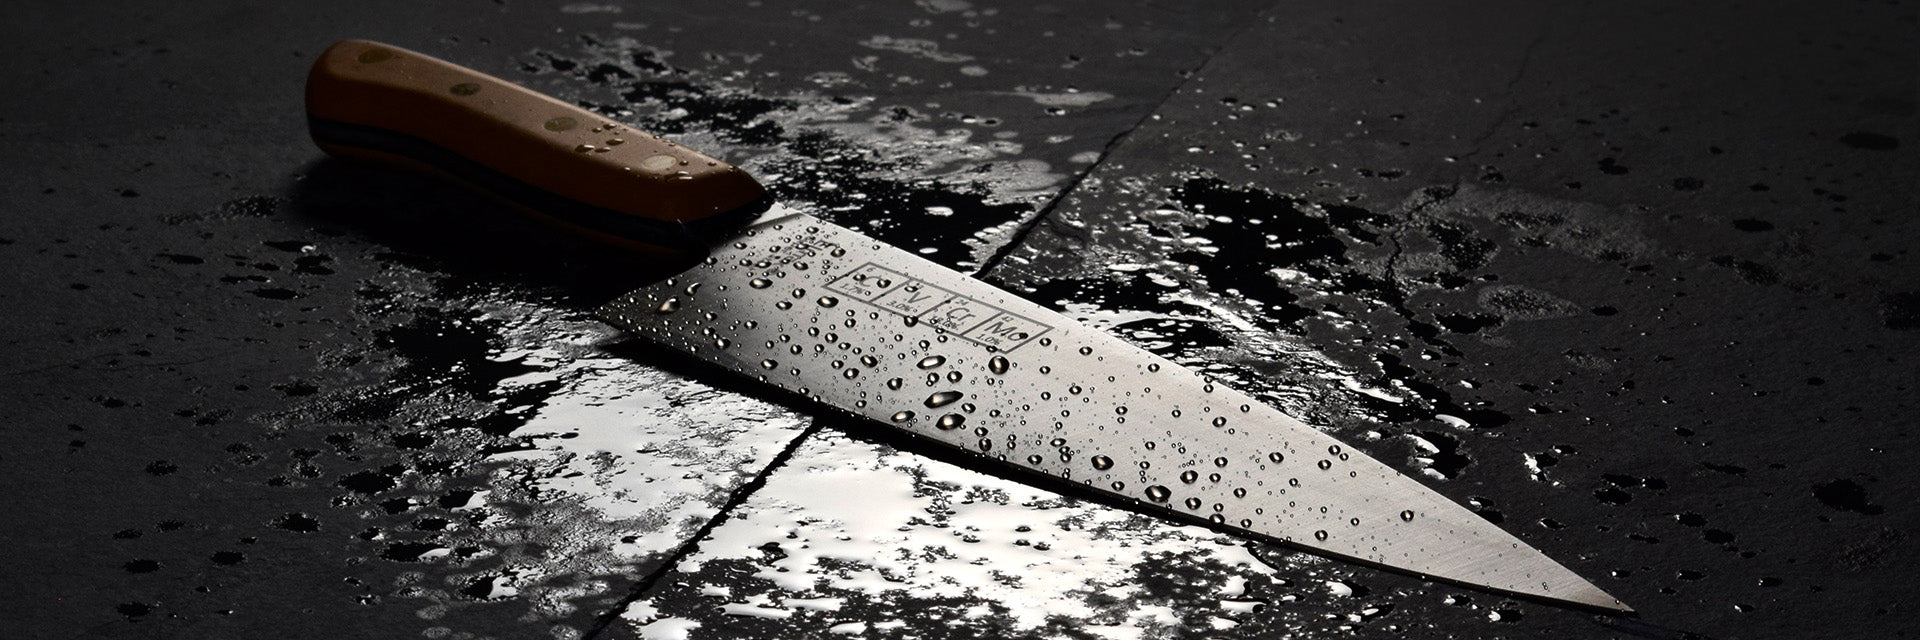 Bottom Line: Picking the best chef's knives